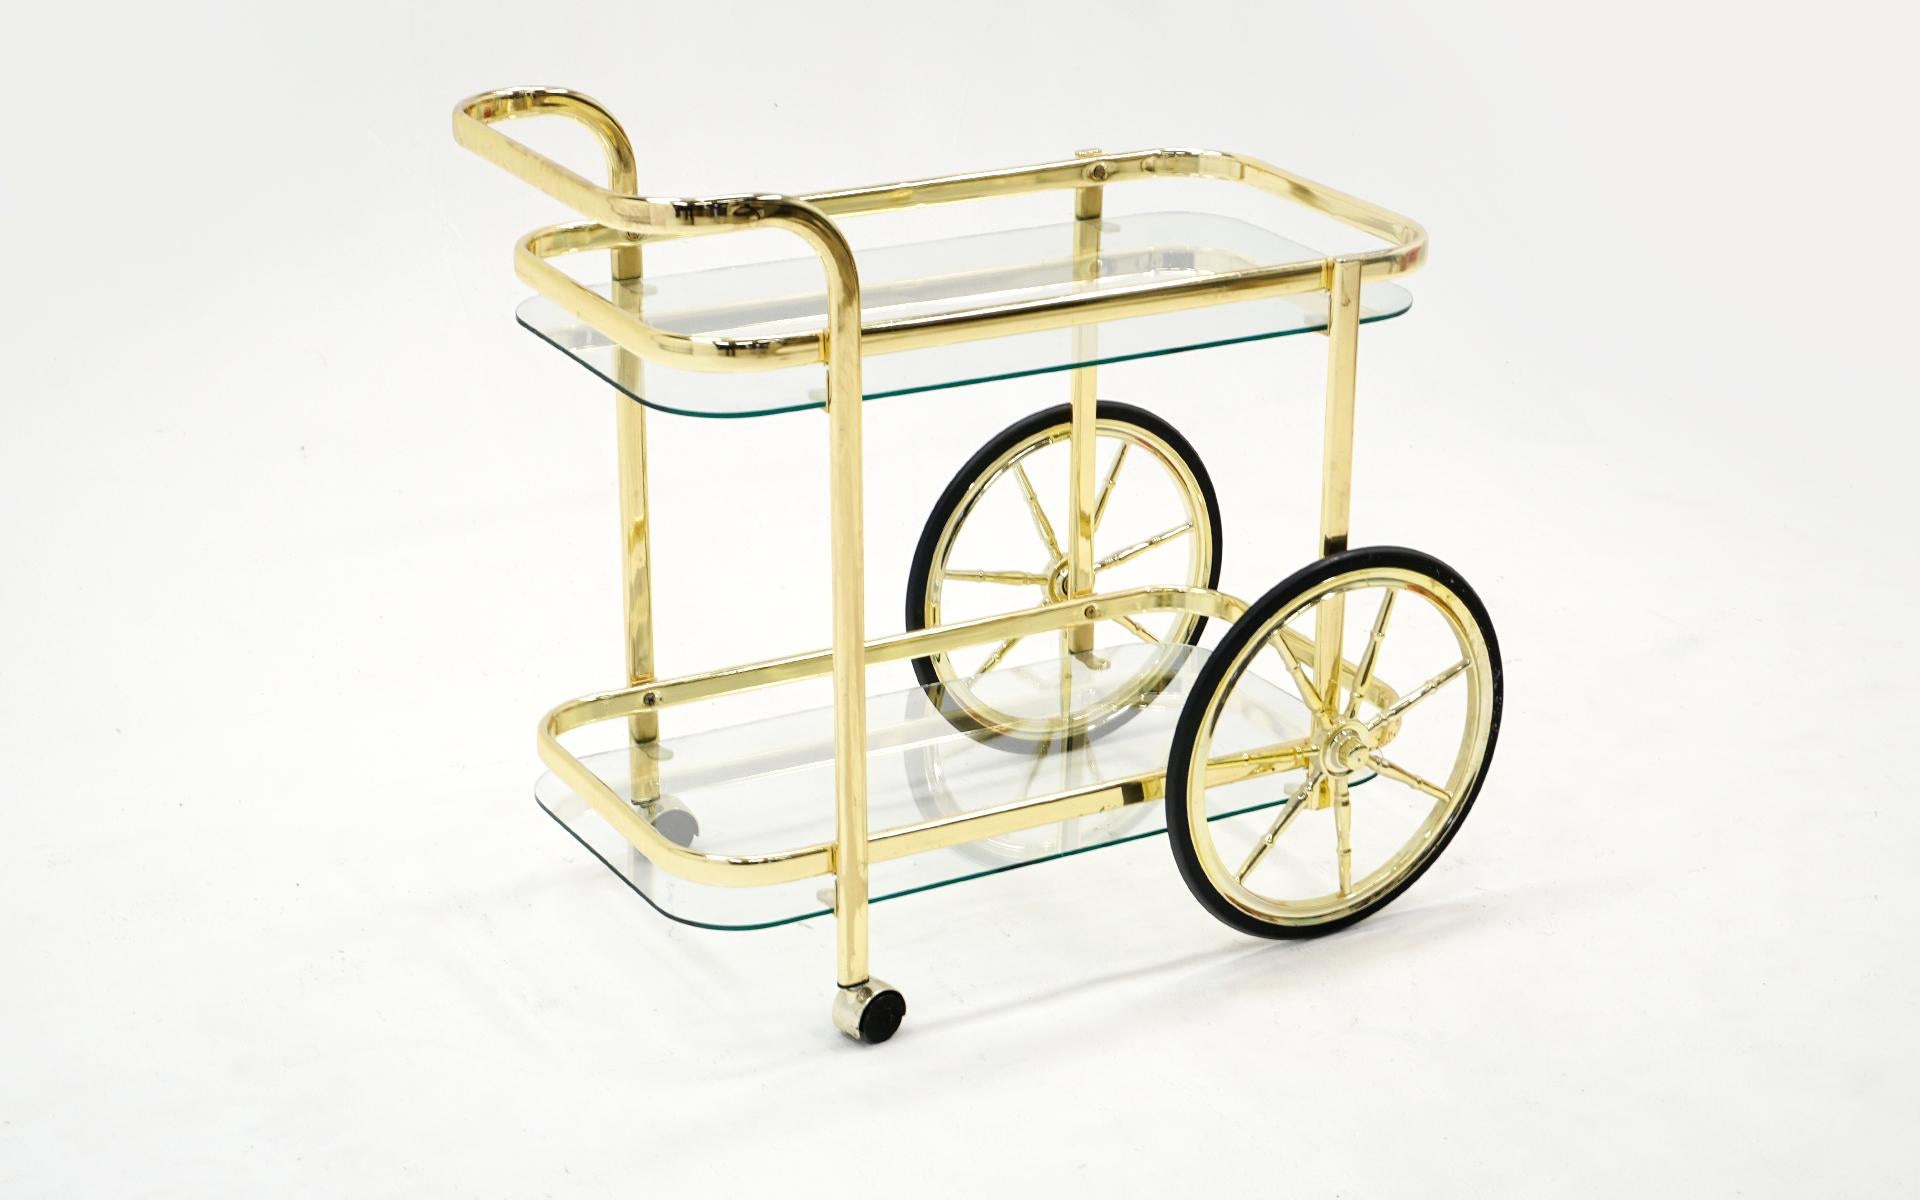 Portable bar / serving cart in brass with two glass shelves and large wheels in very good to excellent condition. Smaller scale. Functions perfectly.